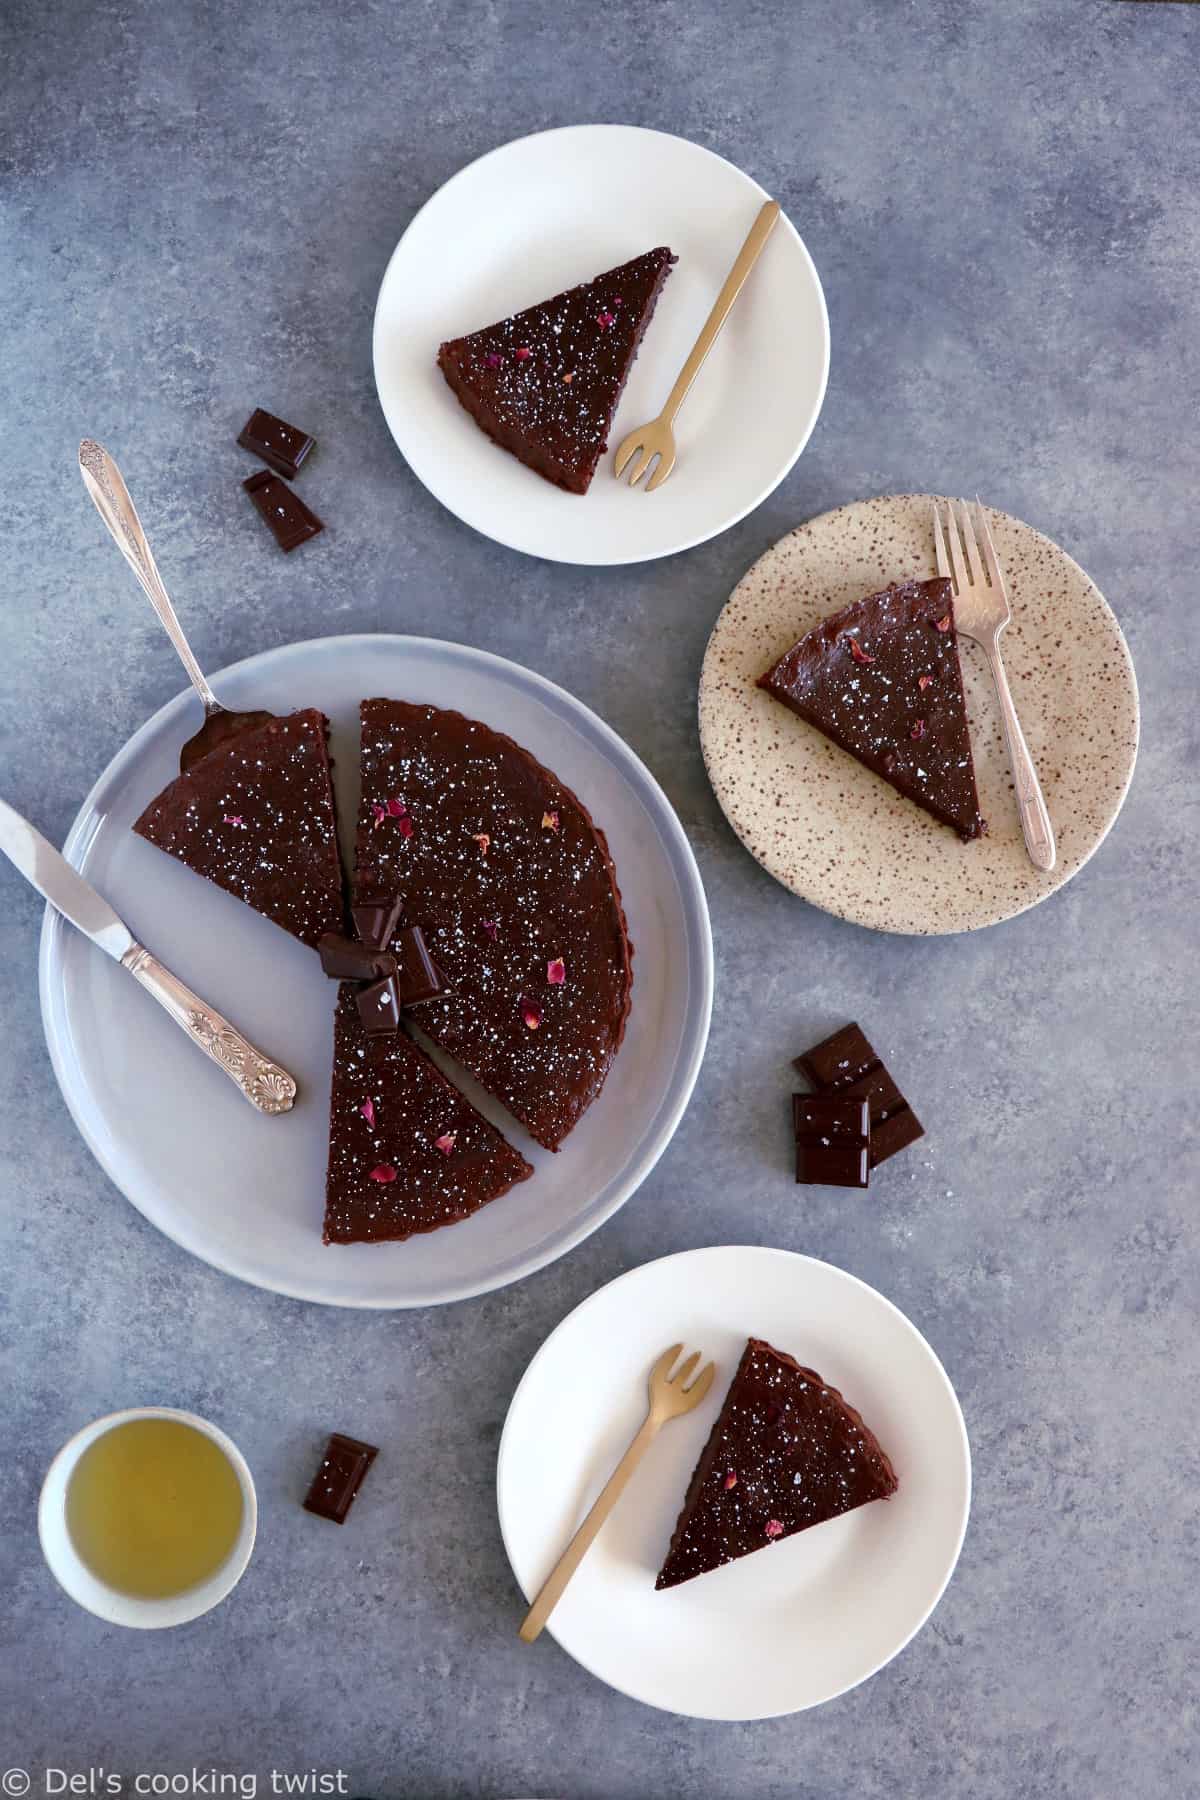 My all-time dark chocolate fondant cake, that I have been baking for over 15 years. This recipe takes less than 5 minutes to prepare, 17 minutes to bake and is by far the very best fondant you can possibly find.